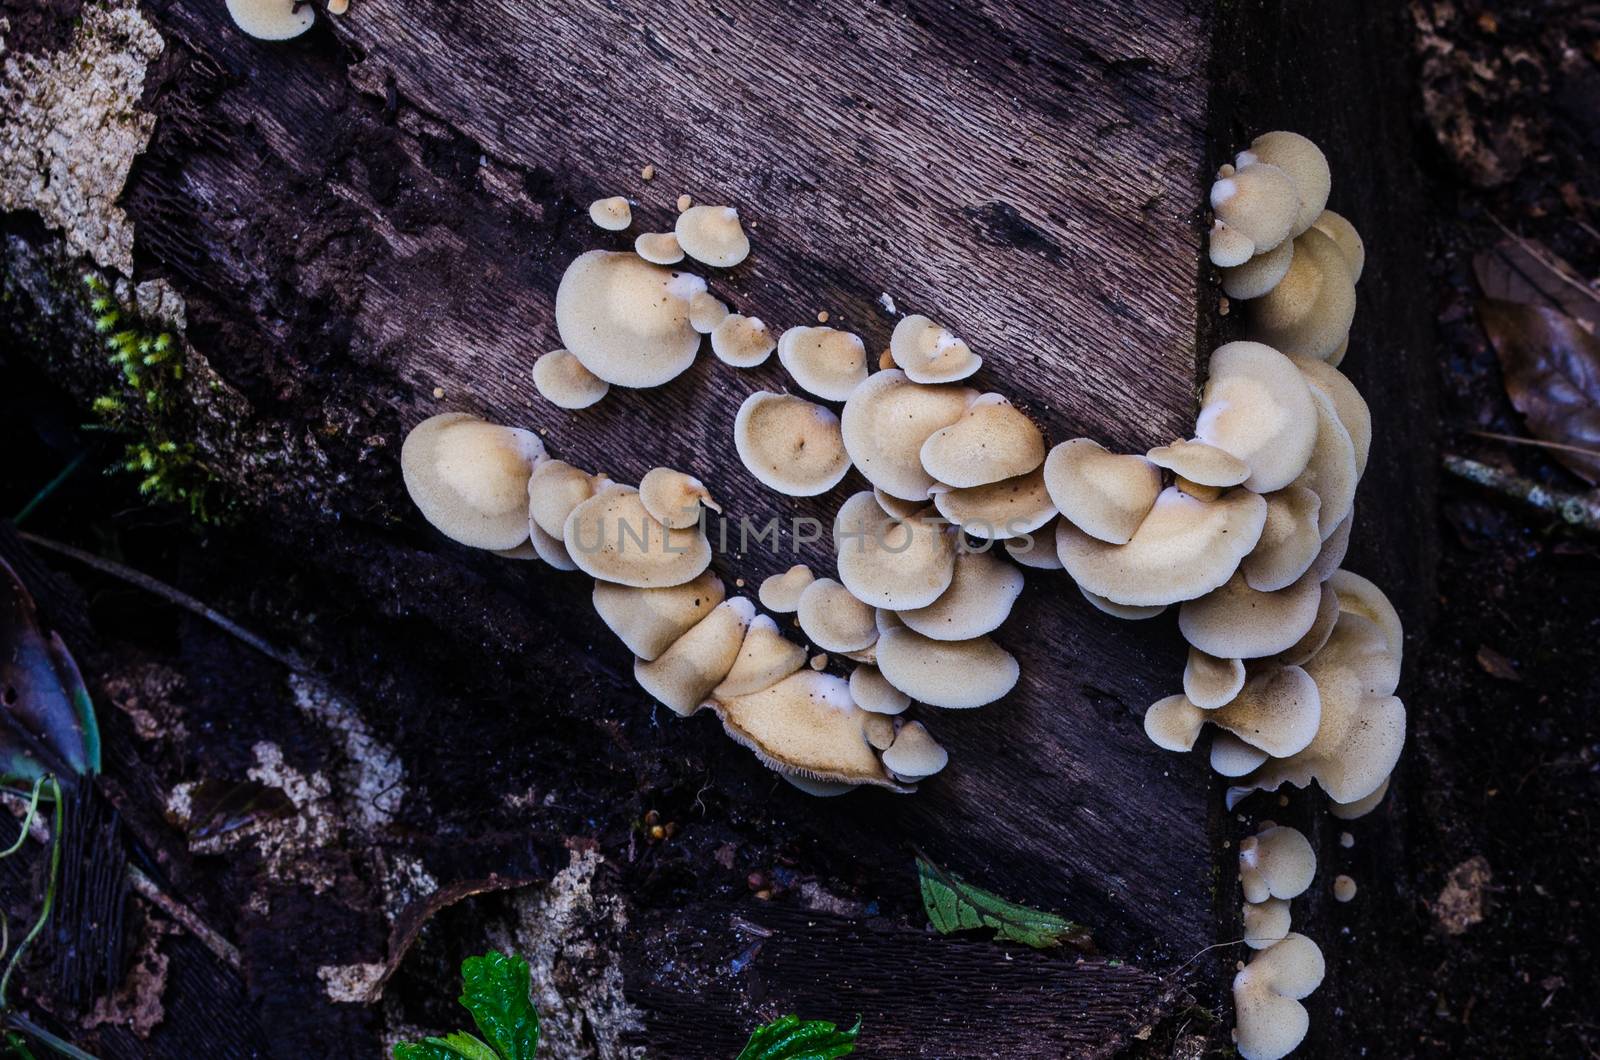 sulfur tuft mushrooms on a trunk in a woodland